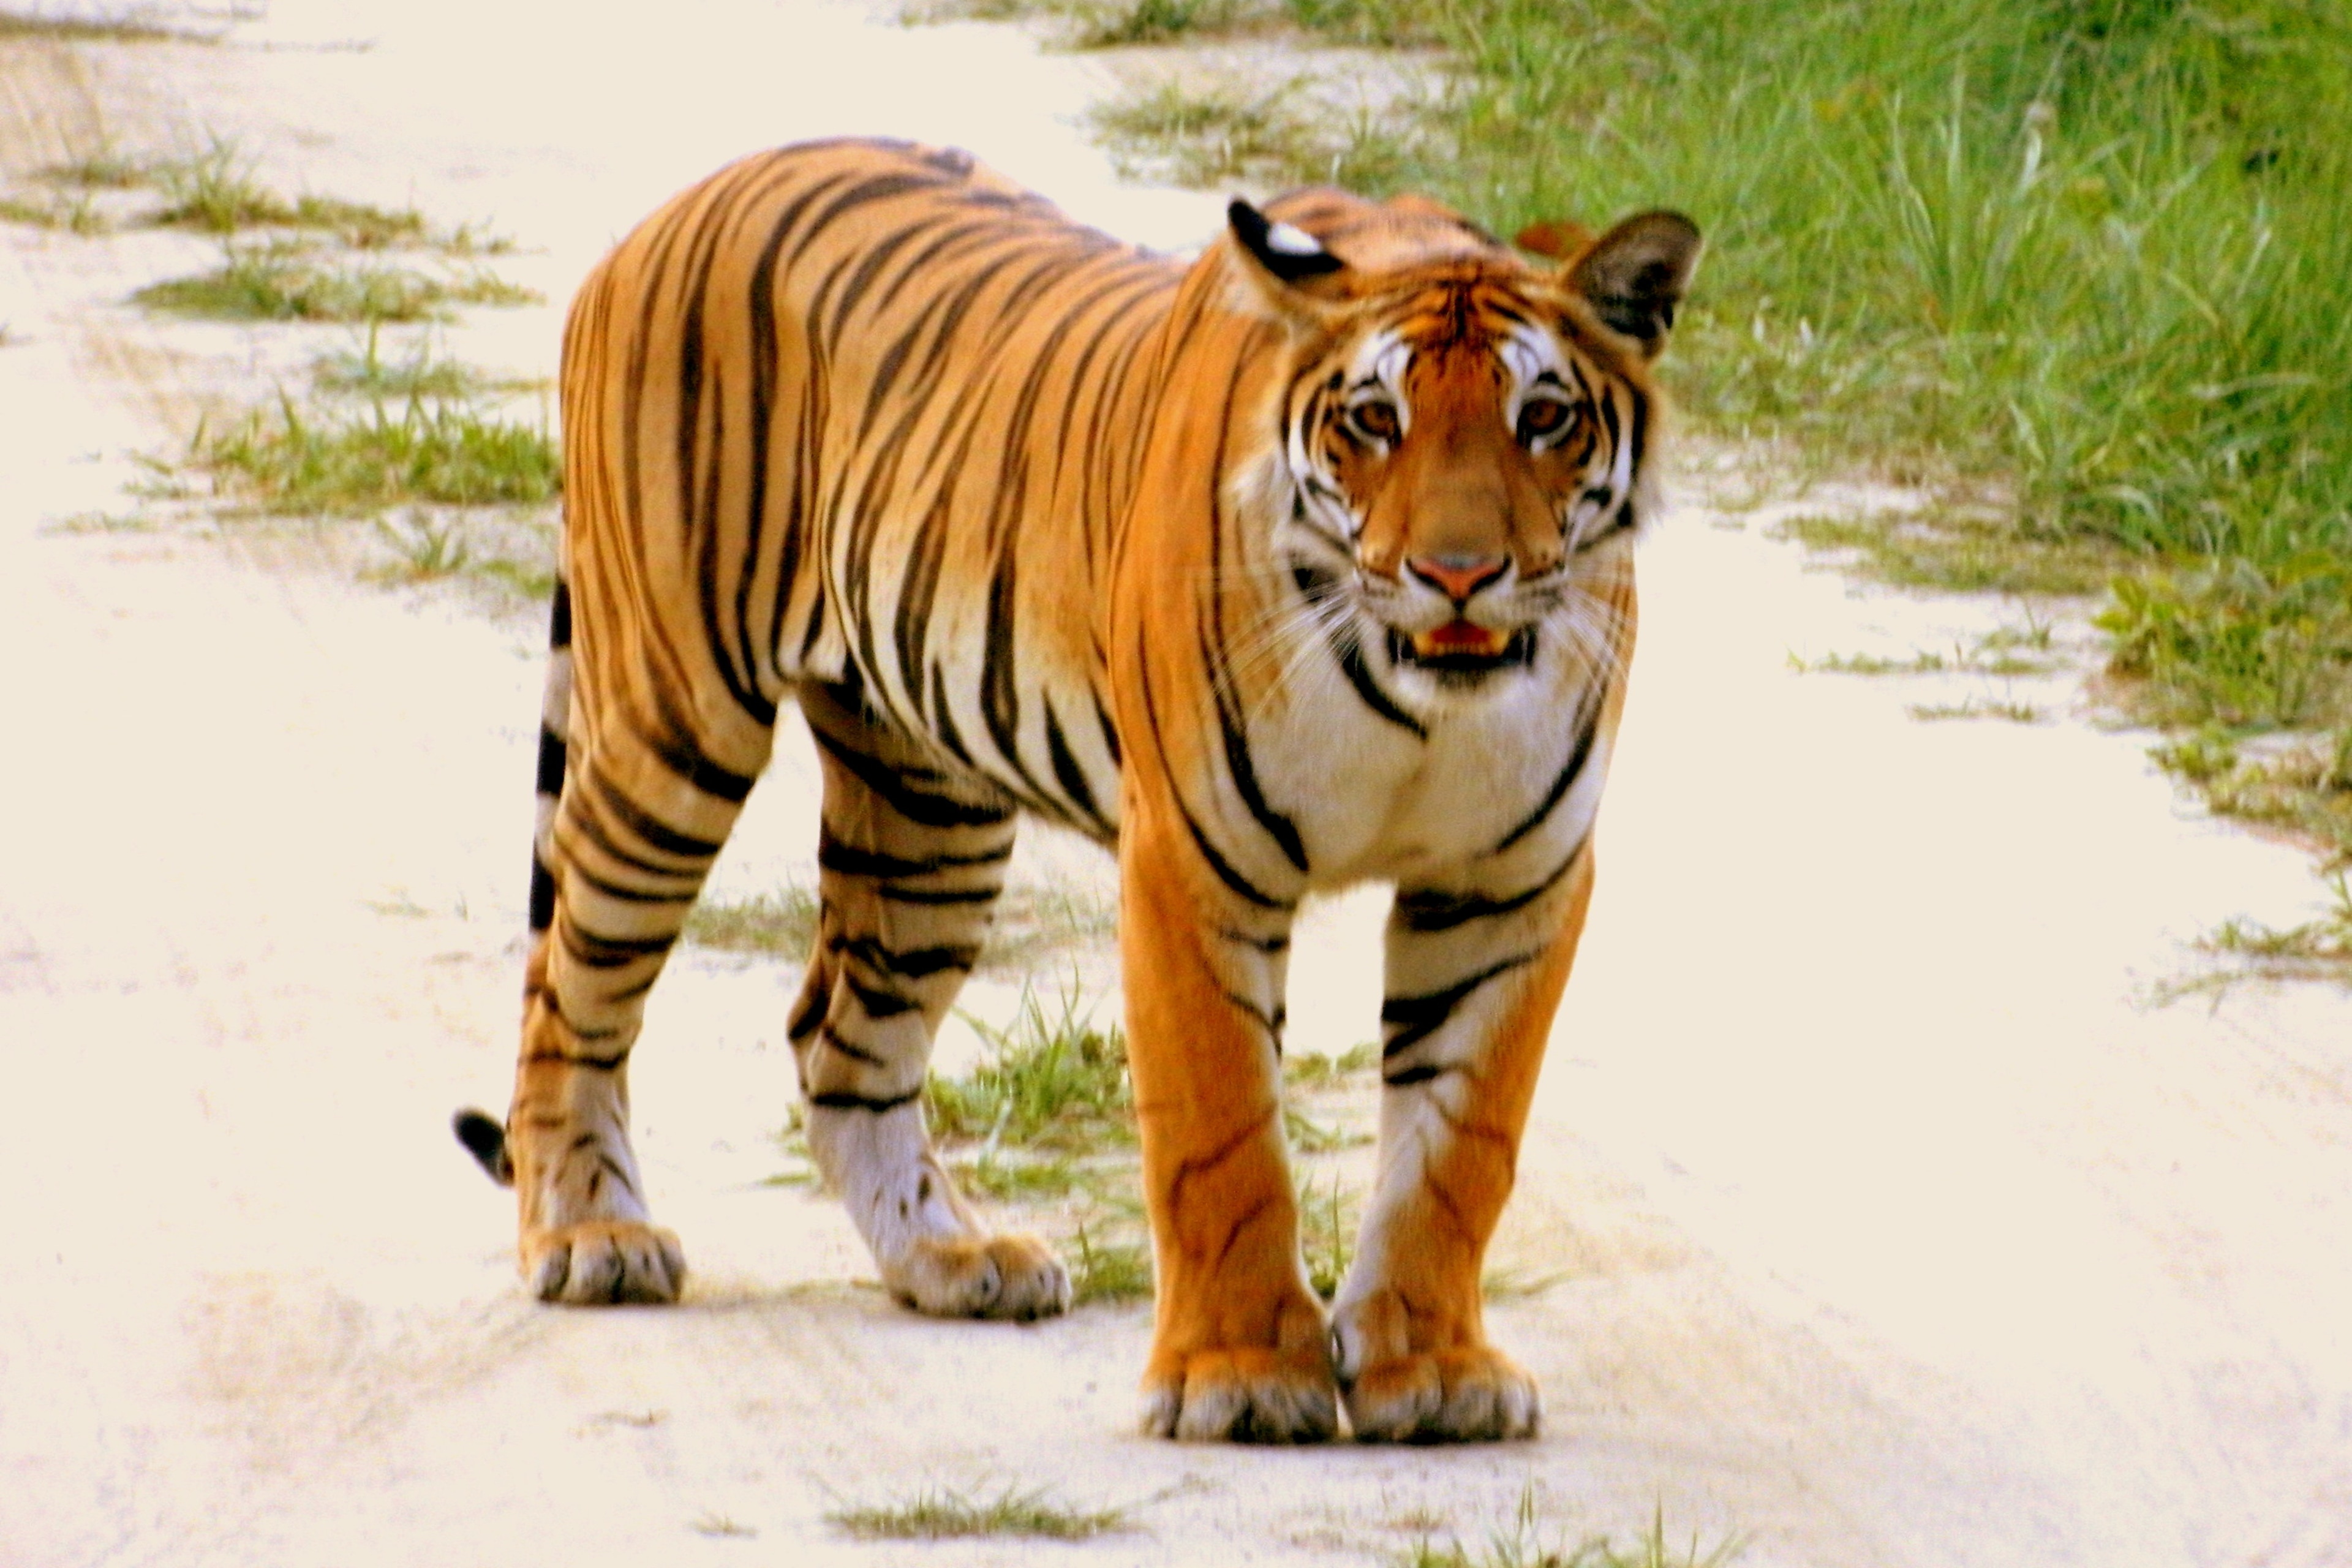 International Tiger Day: How I Spotted Tigers in National Parks in India